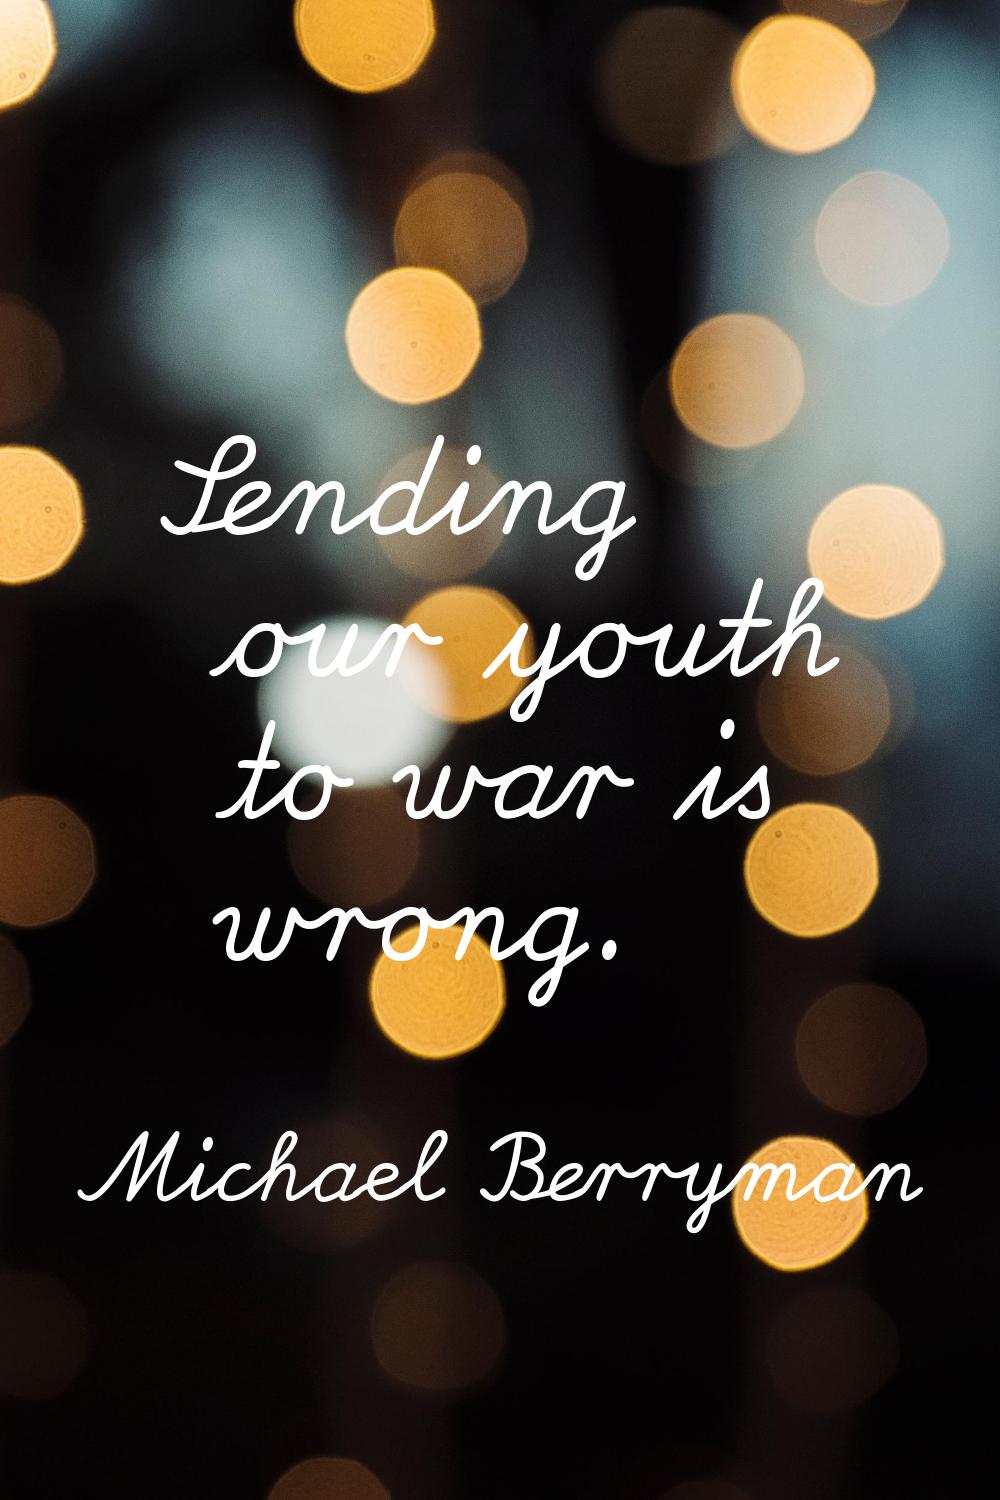 Sending our youth to war is wrong.